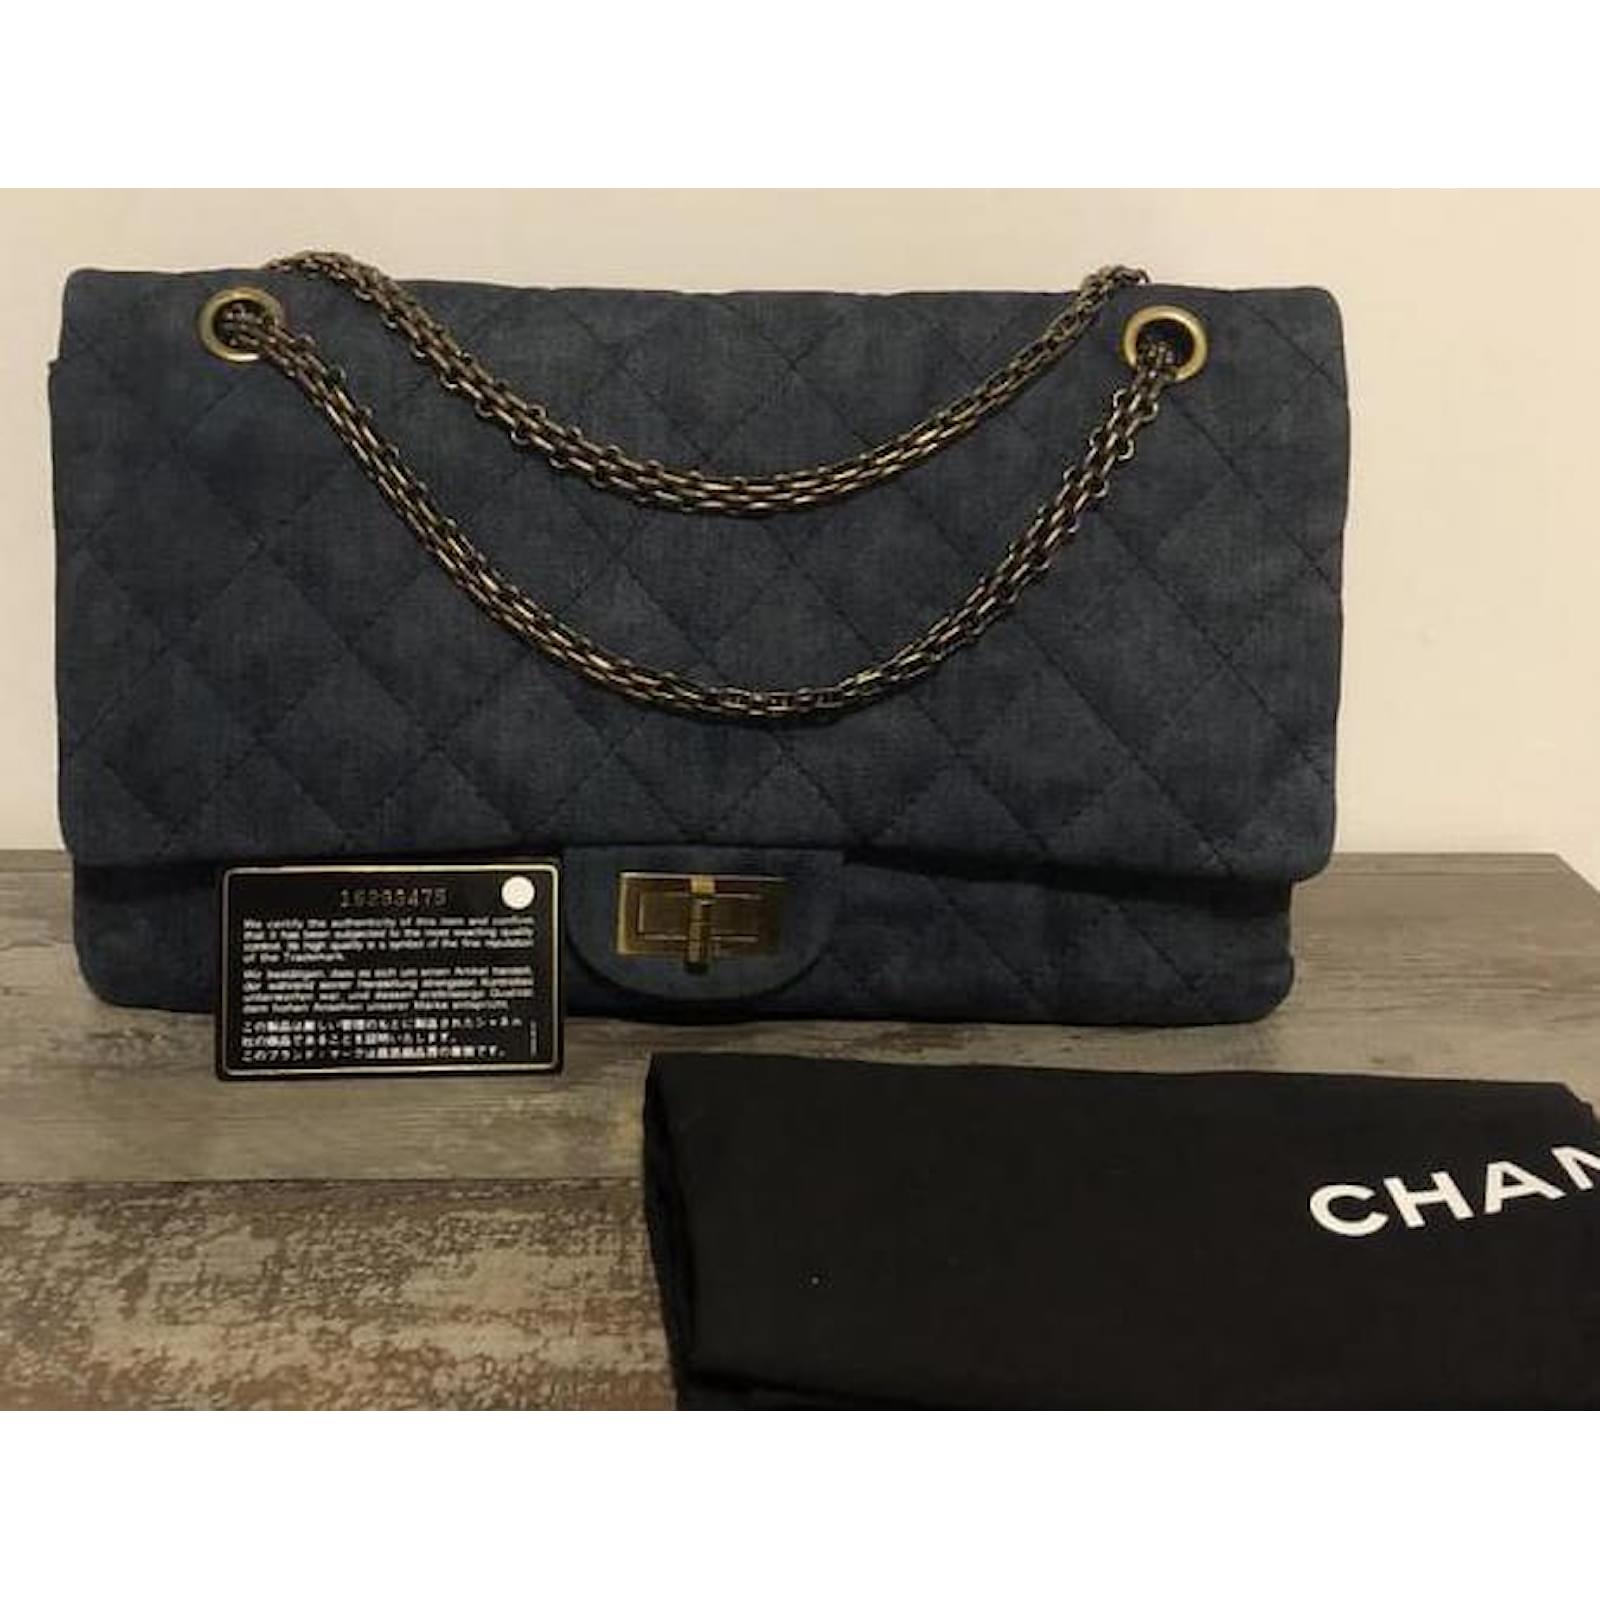 Chanel Classic 2.55 Reissue 227 Maxi lined Flap Navy Blue Denim